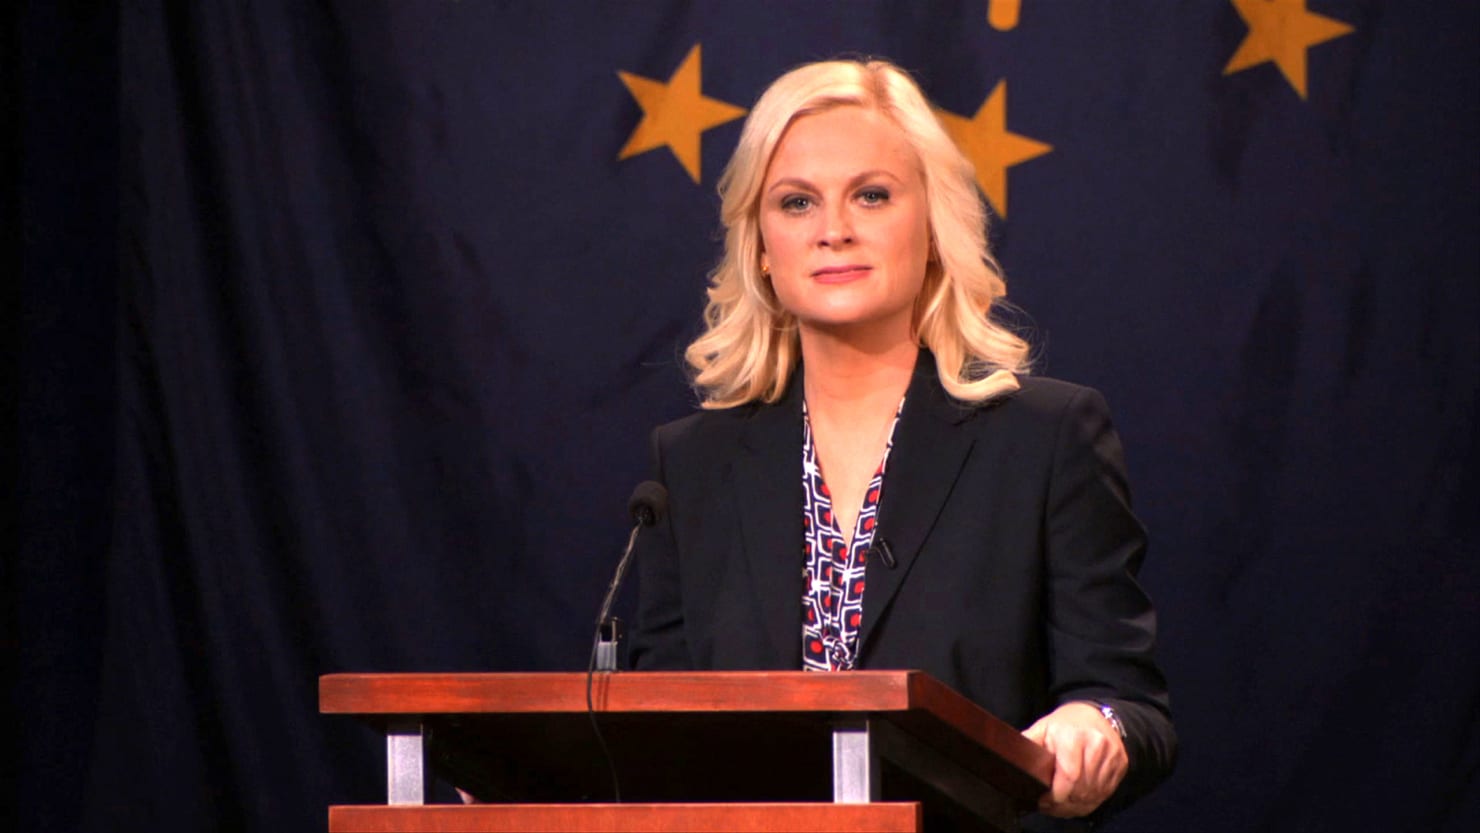 Amy Poehler Tells NRA to ‘F*ck Off’ for Using Leslie Knope Meme1480 x 833